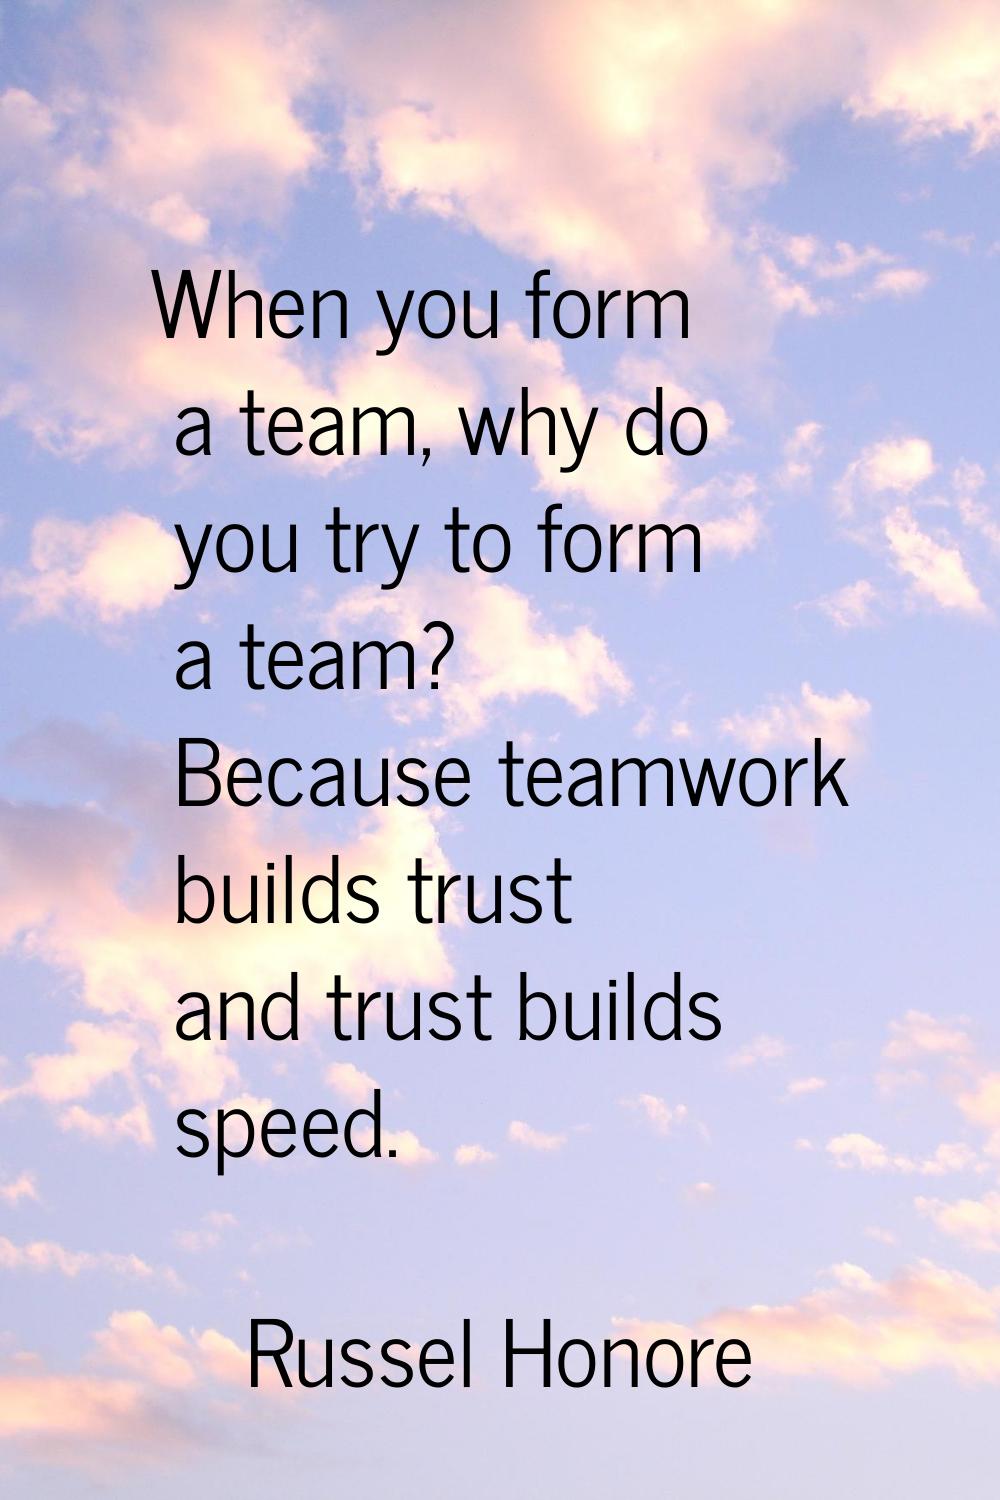 When you form a team, why do you try to form a team? Because teamwork builds trust and trust builds